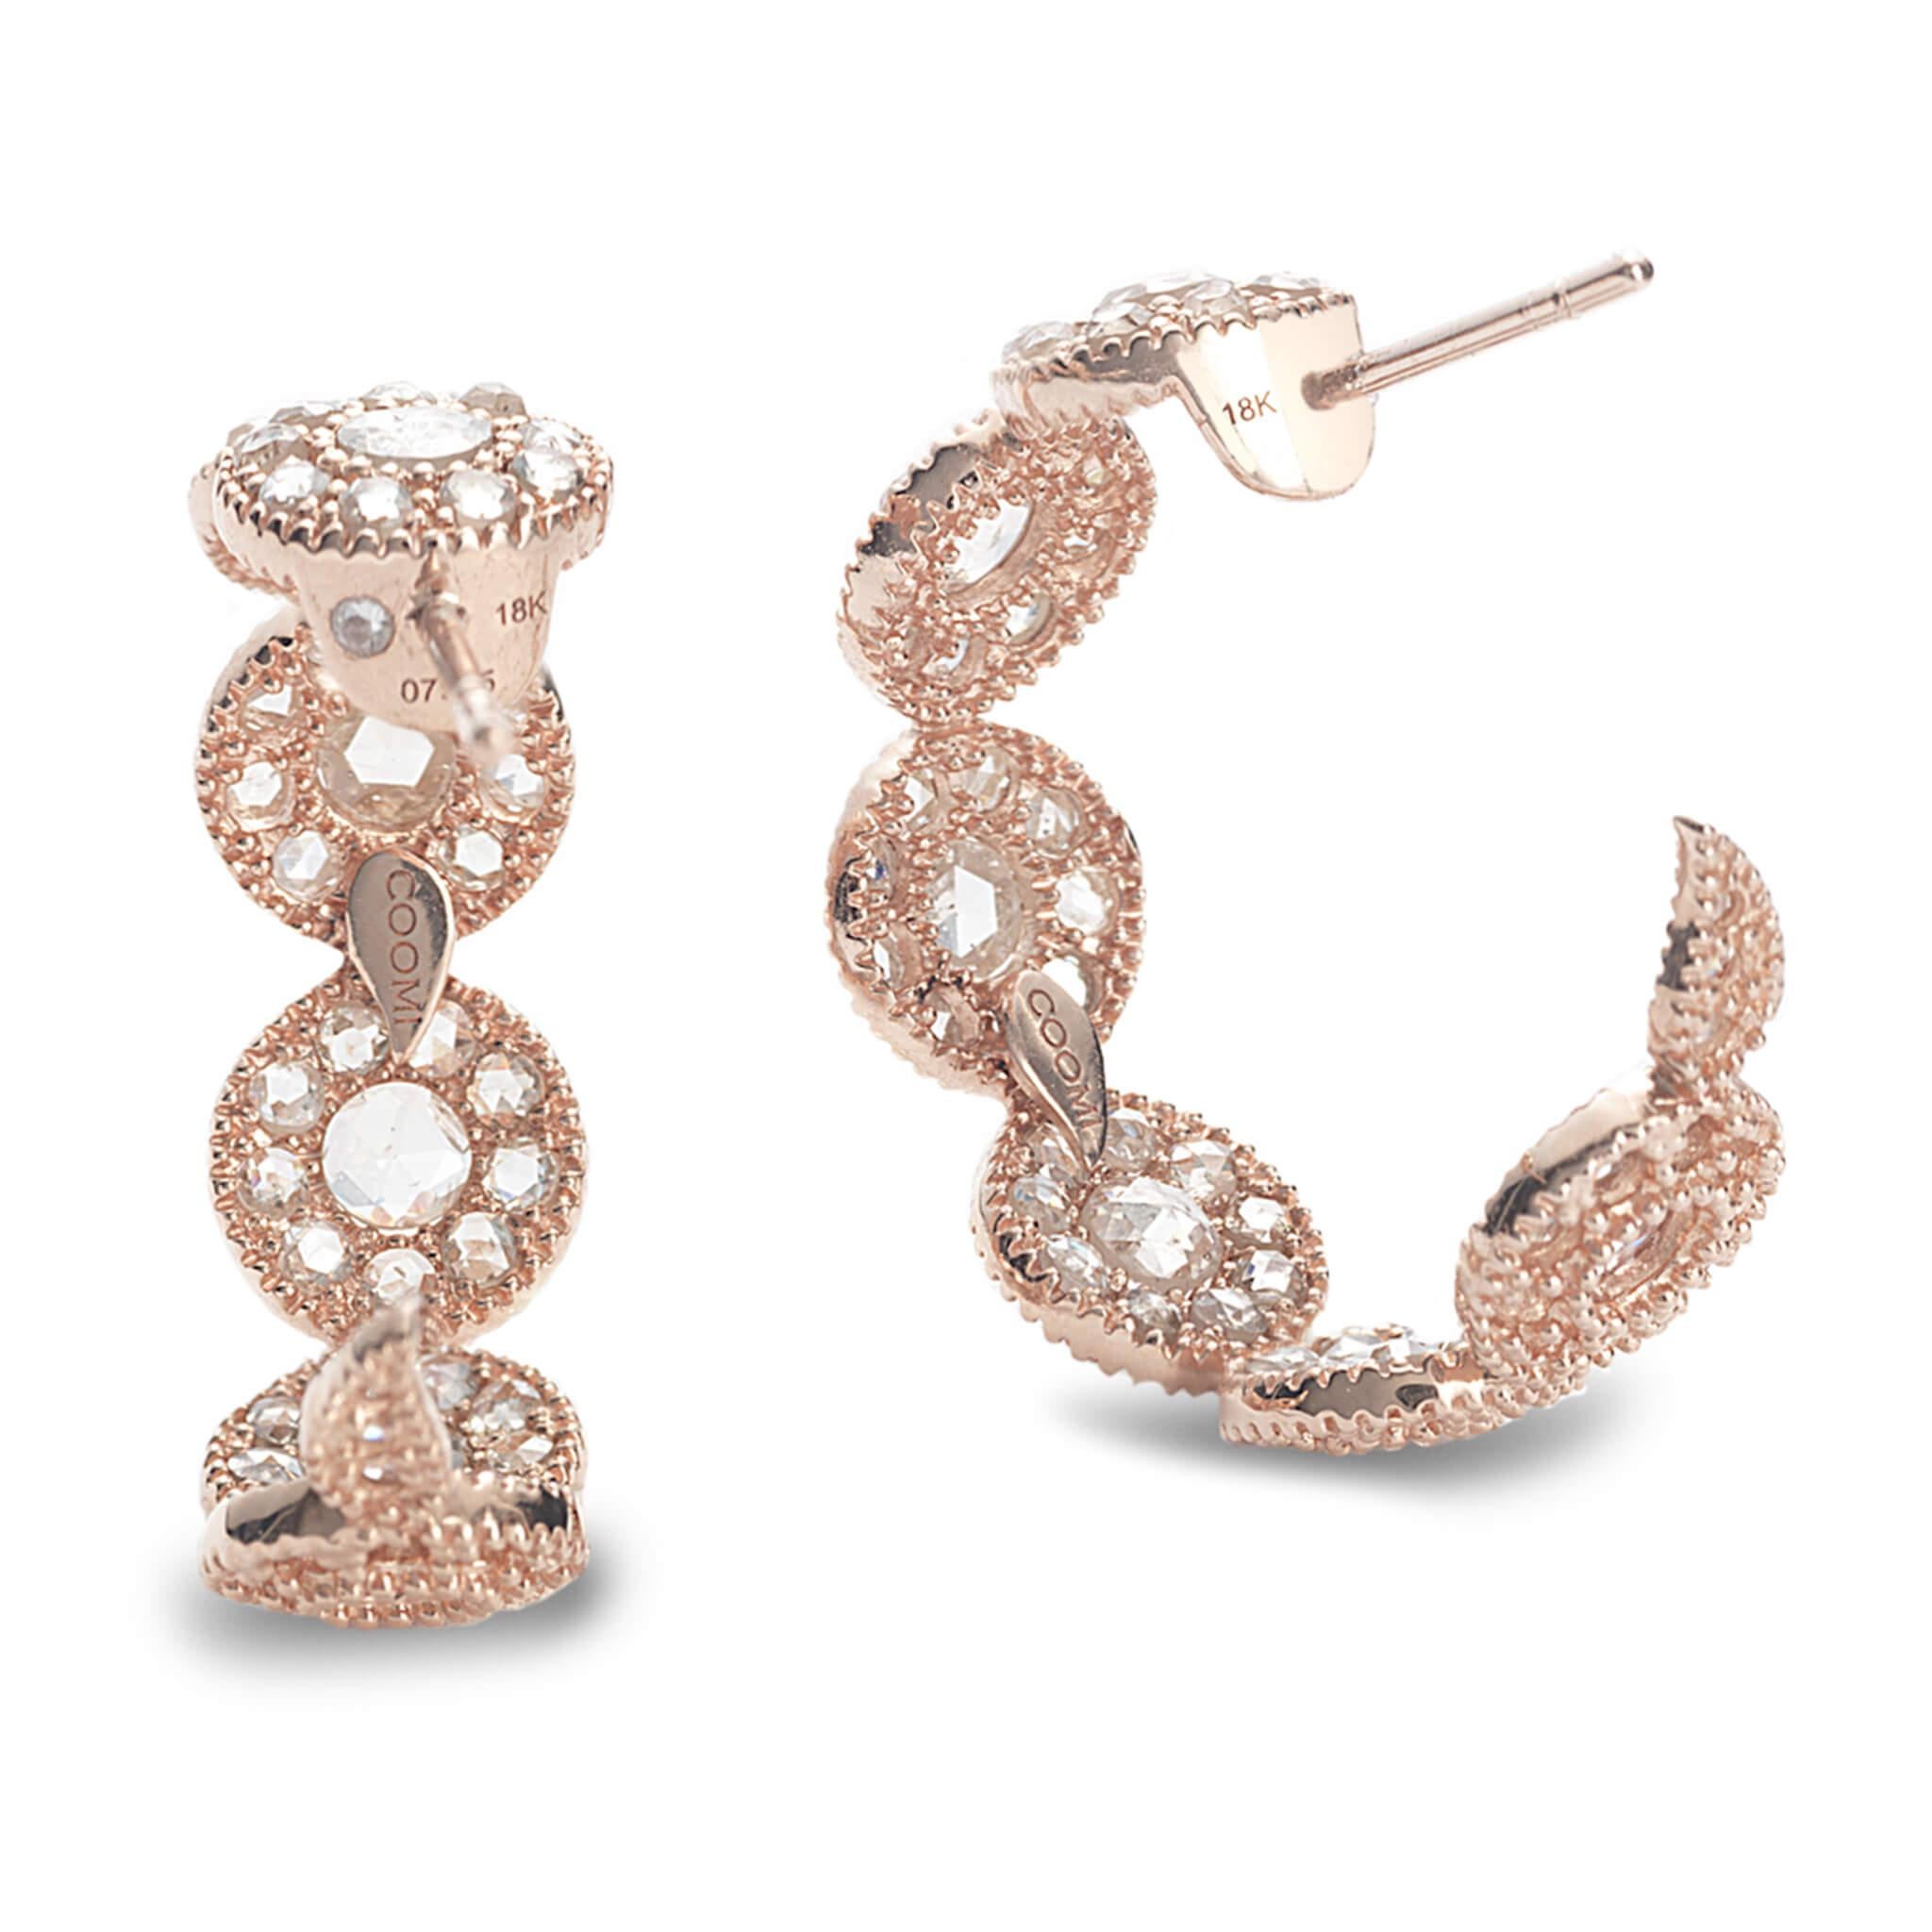 Coomi Eternity hoop earrings set in 20K rose gold with 3.18cts diamonds.

Coomi’s Eternity Collection is inspired by continuity and wholeness represented by the immortal idea of having no beginning and no end.

Shapes such as circles and ovals